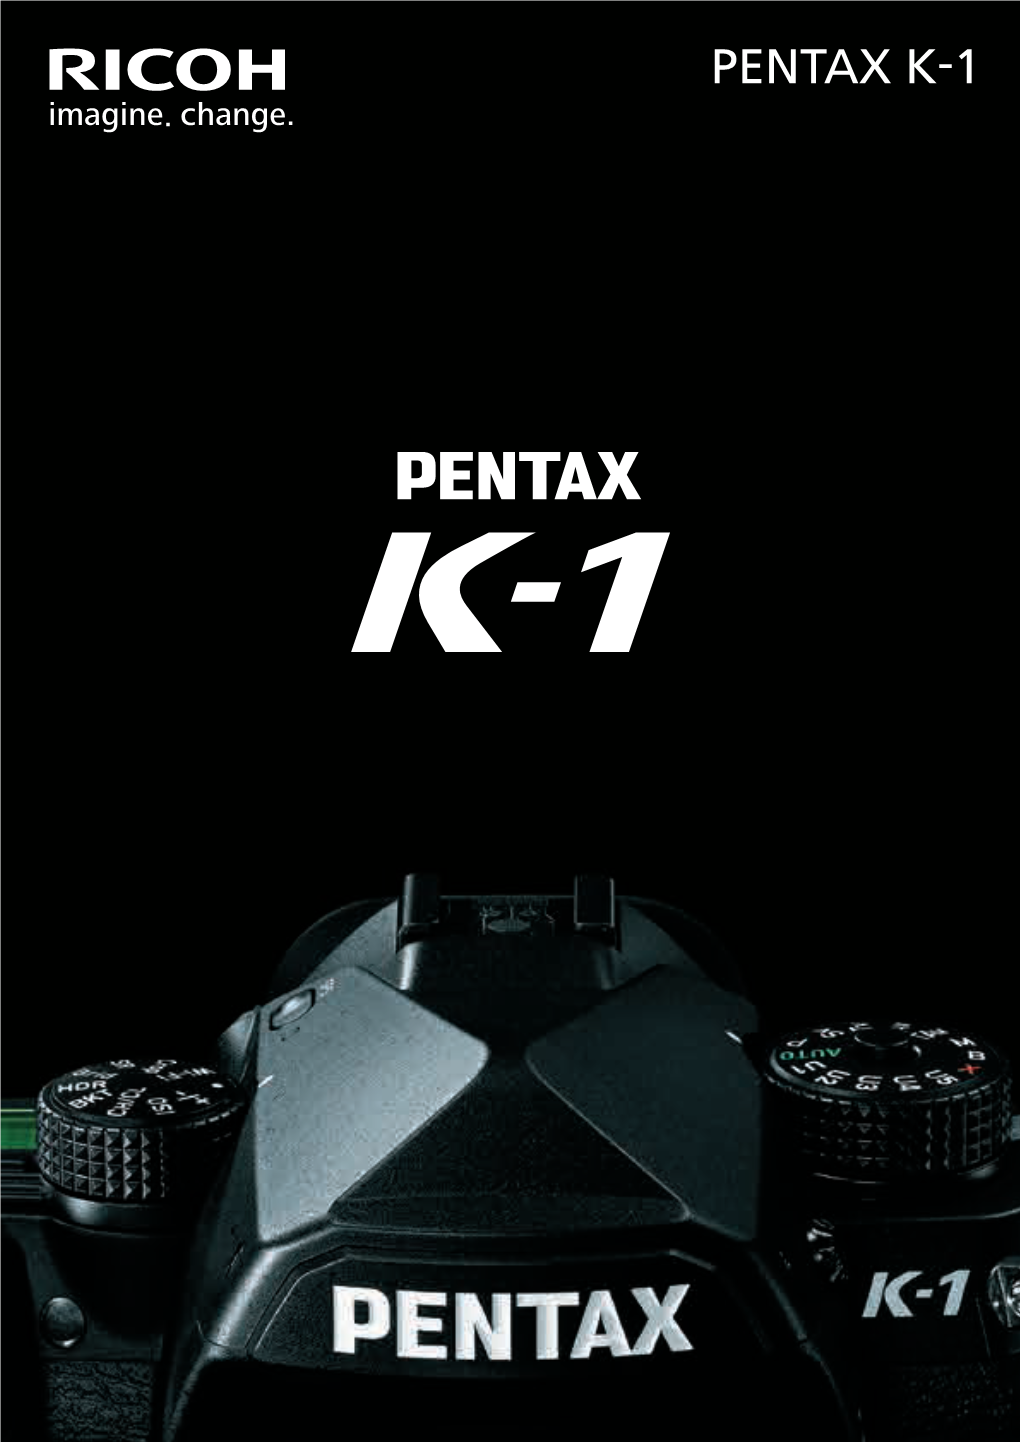 PENTAX’S SLR Camera History: the Heritage of a Field Camera